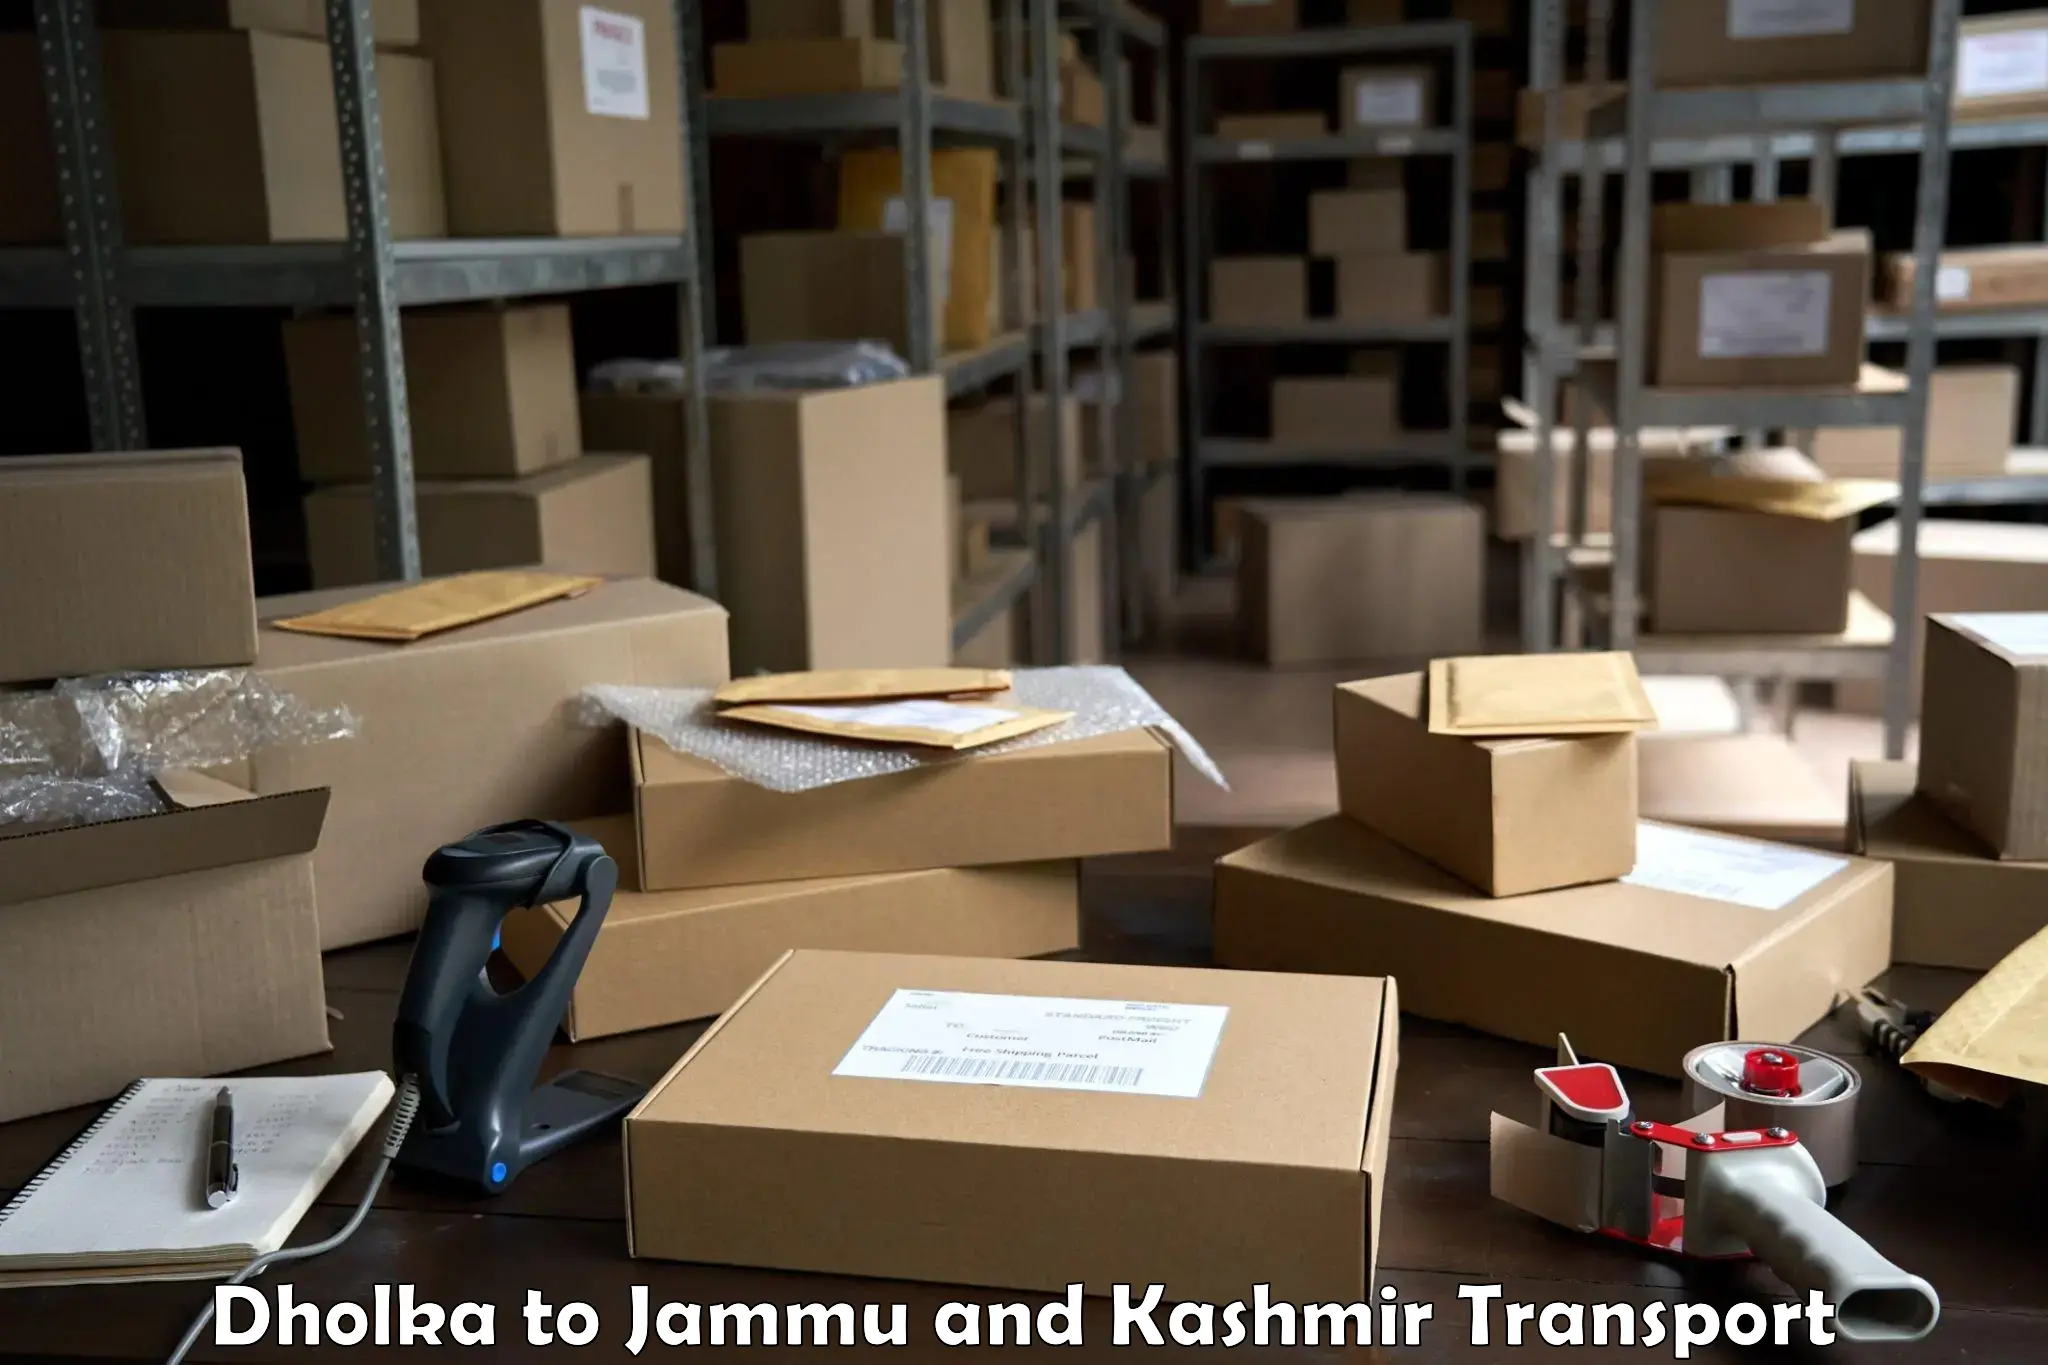 Goods delivery service Dholka to Jammu